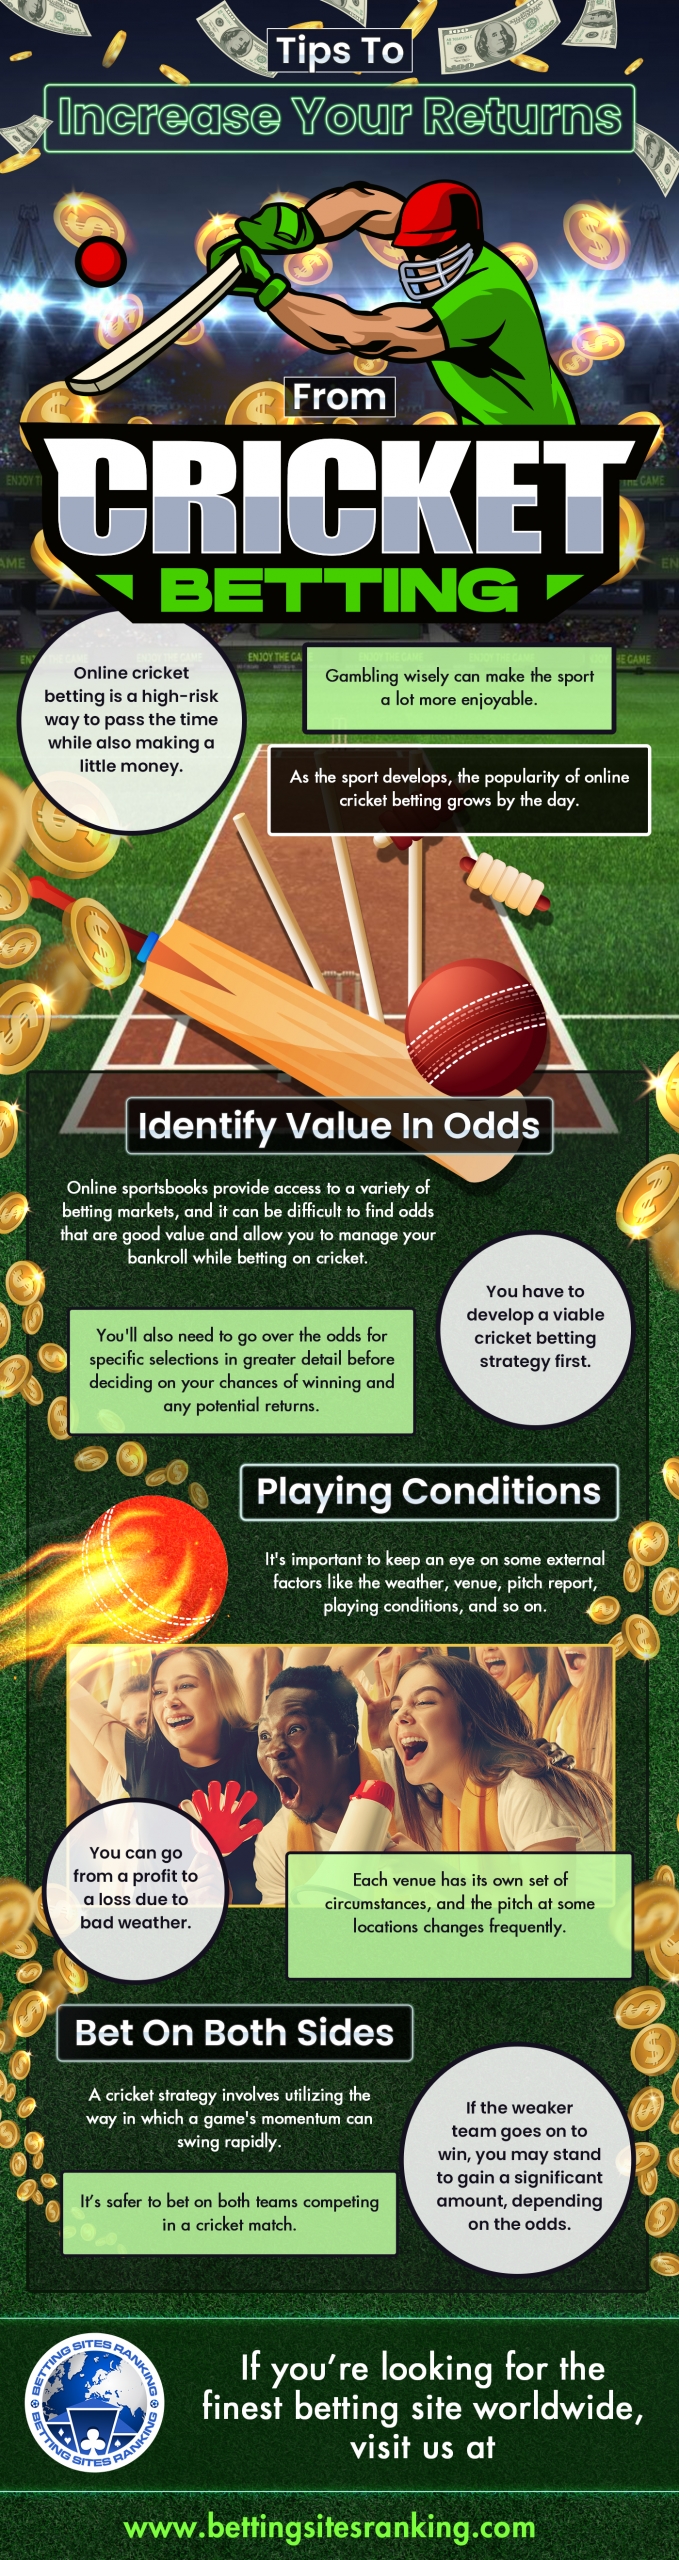 Tips To Improve Your Cricket Betting Ideas